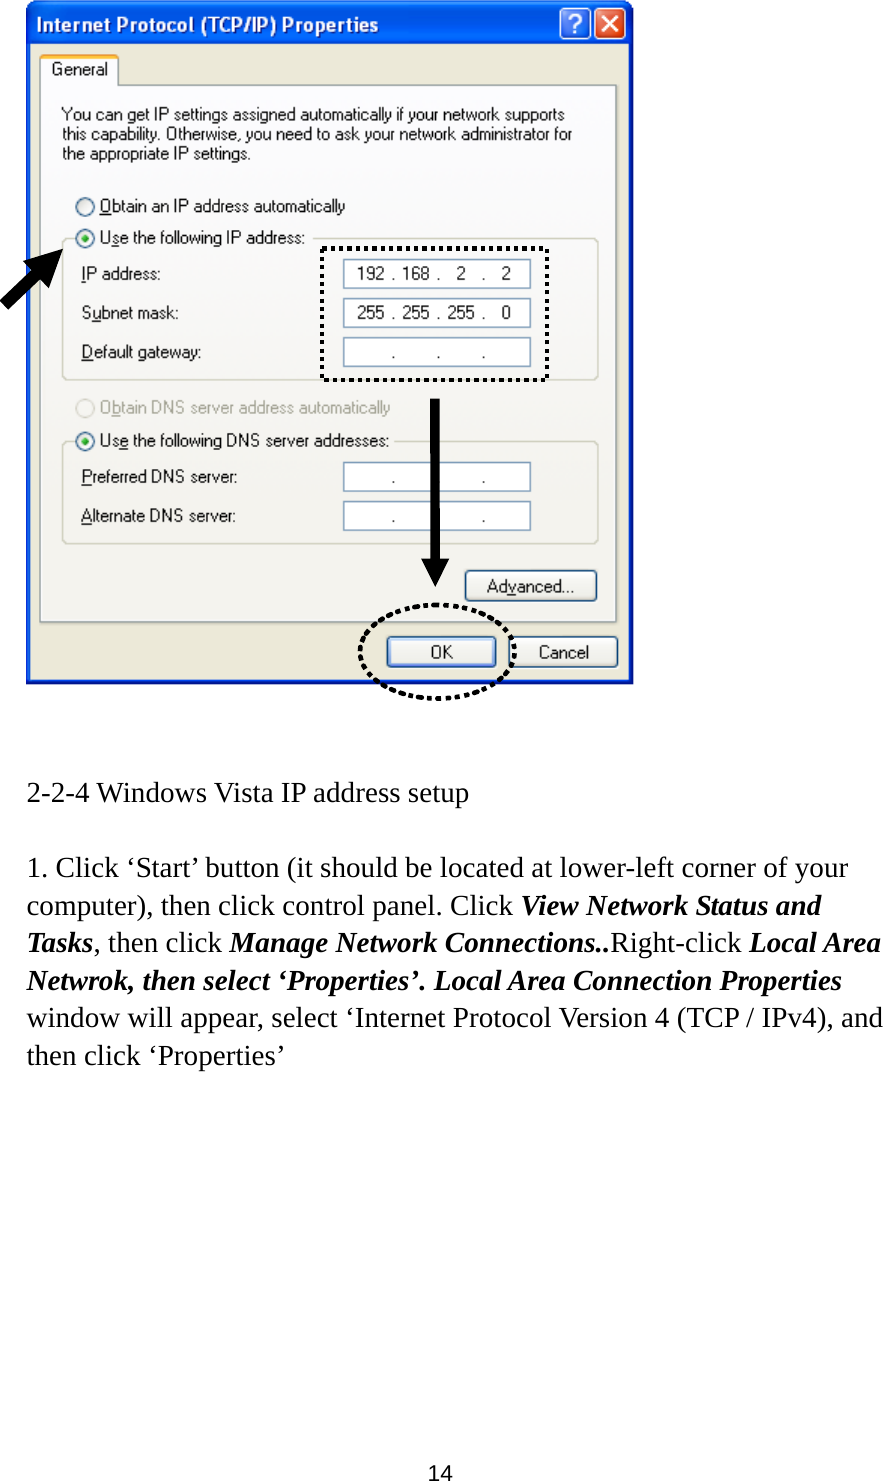  14    2-2-4 Windows Vista IP address setup  1. Click ‘Start’ button (it should be located at lower-left corner of your computer), then click control panel. Click View Network Status and Tasks, then click Manage Network Connections..Right-click Local Area Netwrok, then select ‘Properties’. Local Area Connection Properties window will appear, select ‘Internet Protocol Version 4 (TCP / IPv4), and then click ‘Properties’  